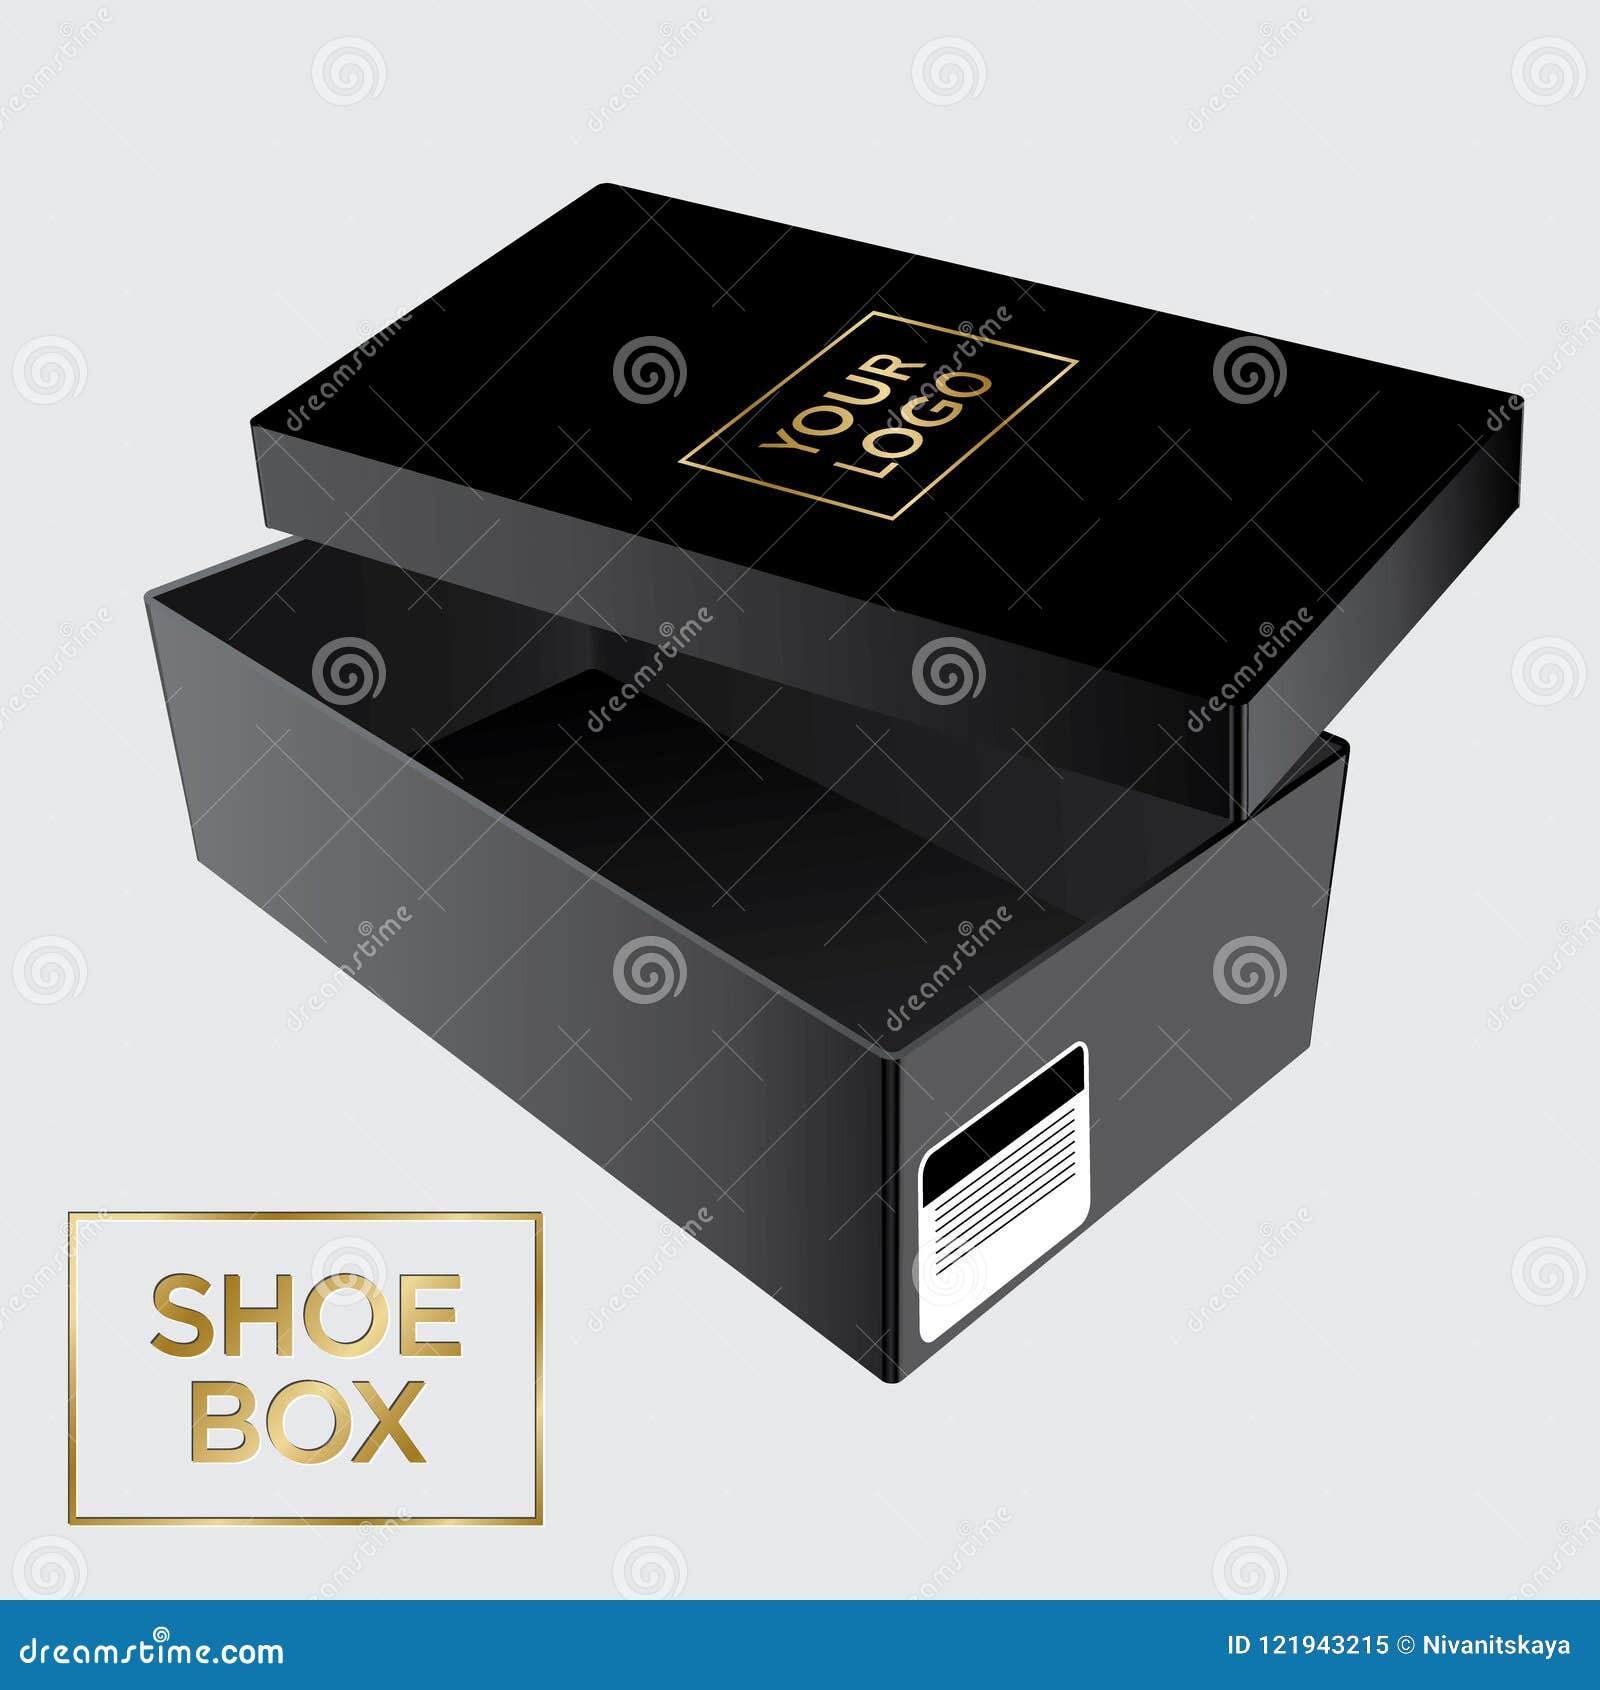 Download Open Shoe Box With Lid Mockup. Black Box And A Sticker ...